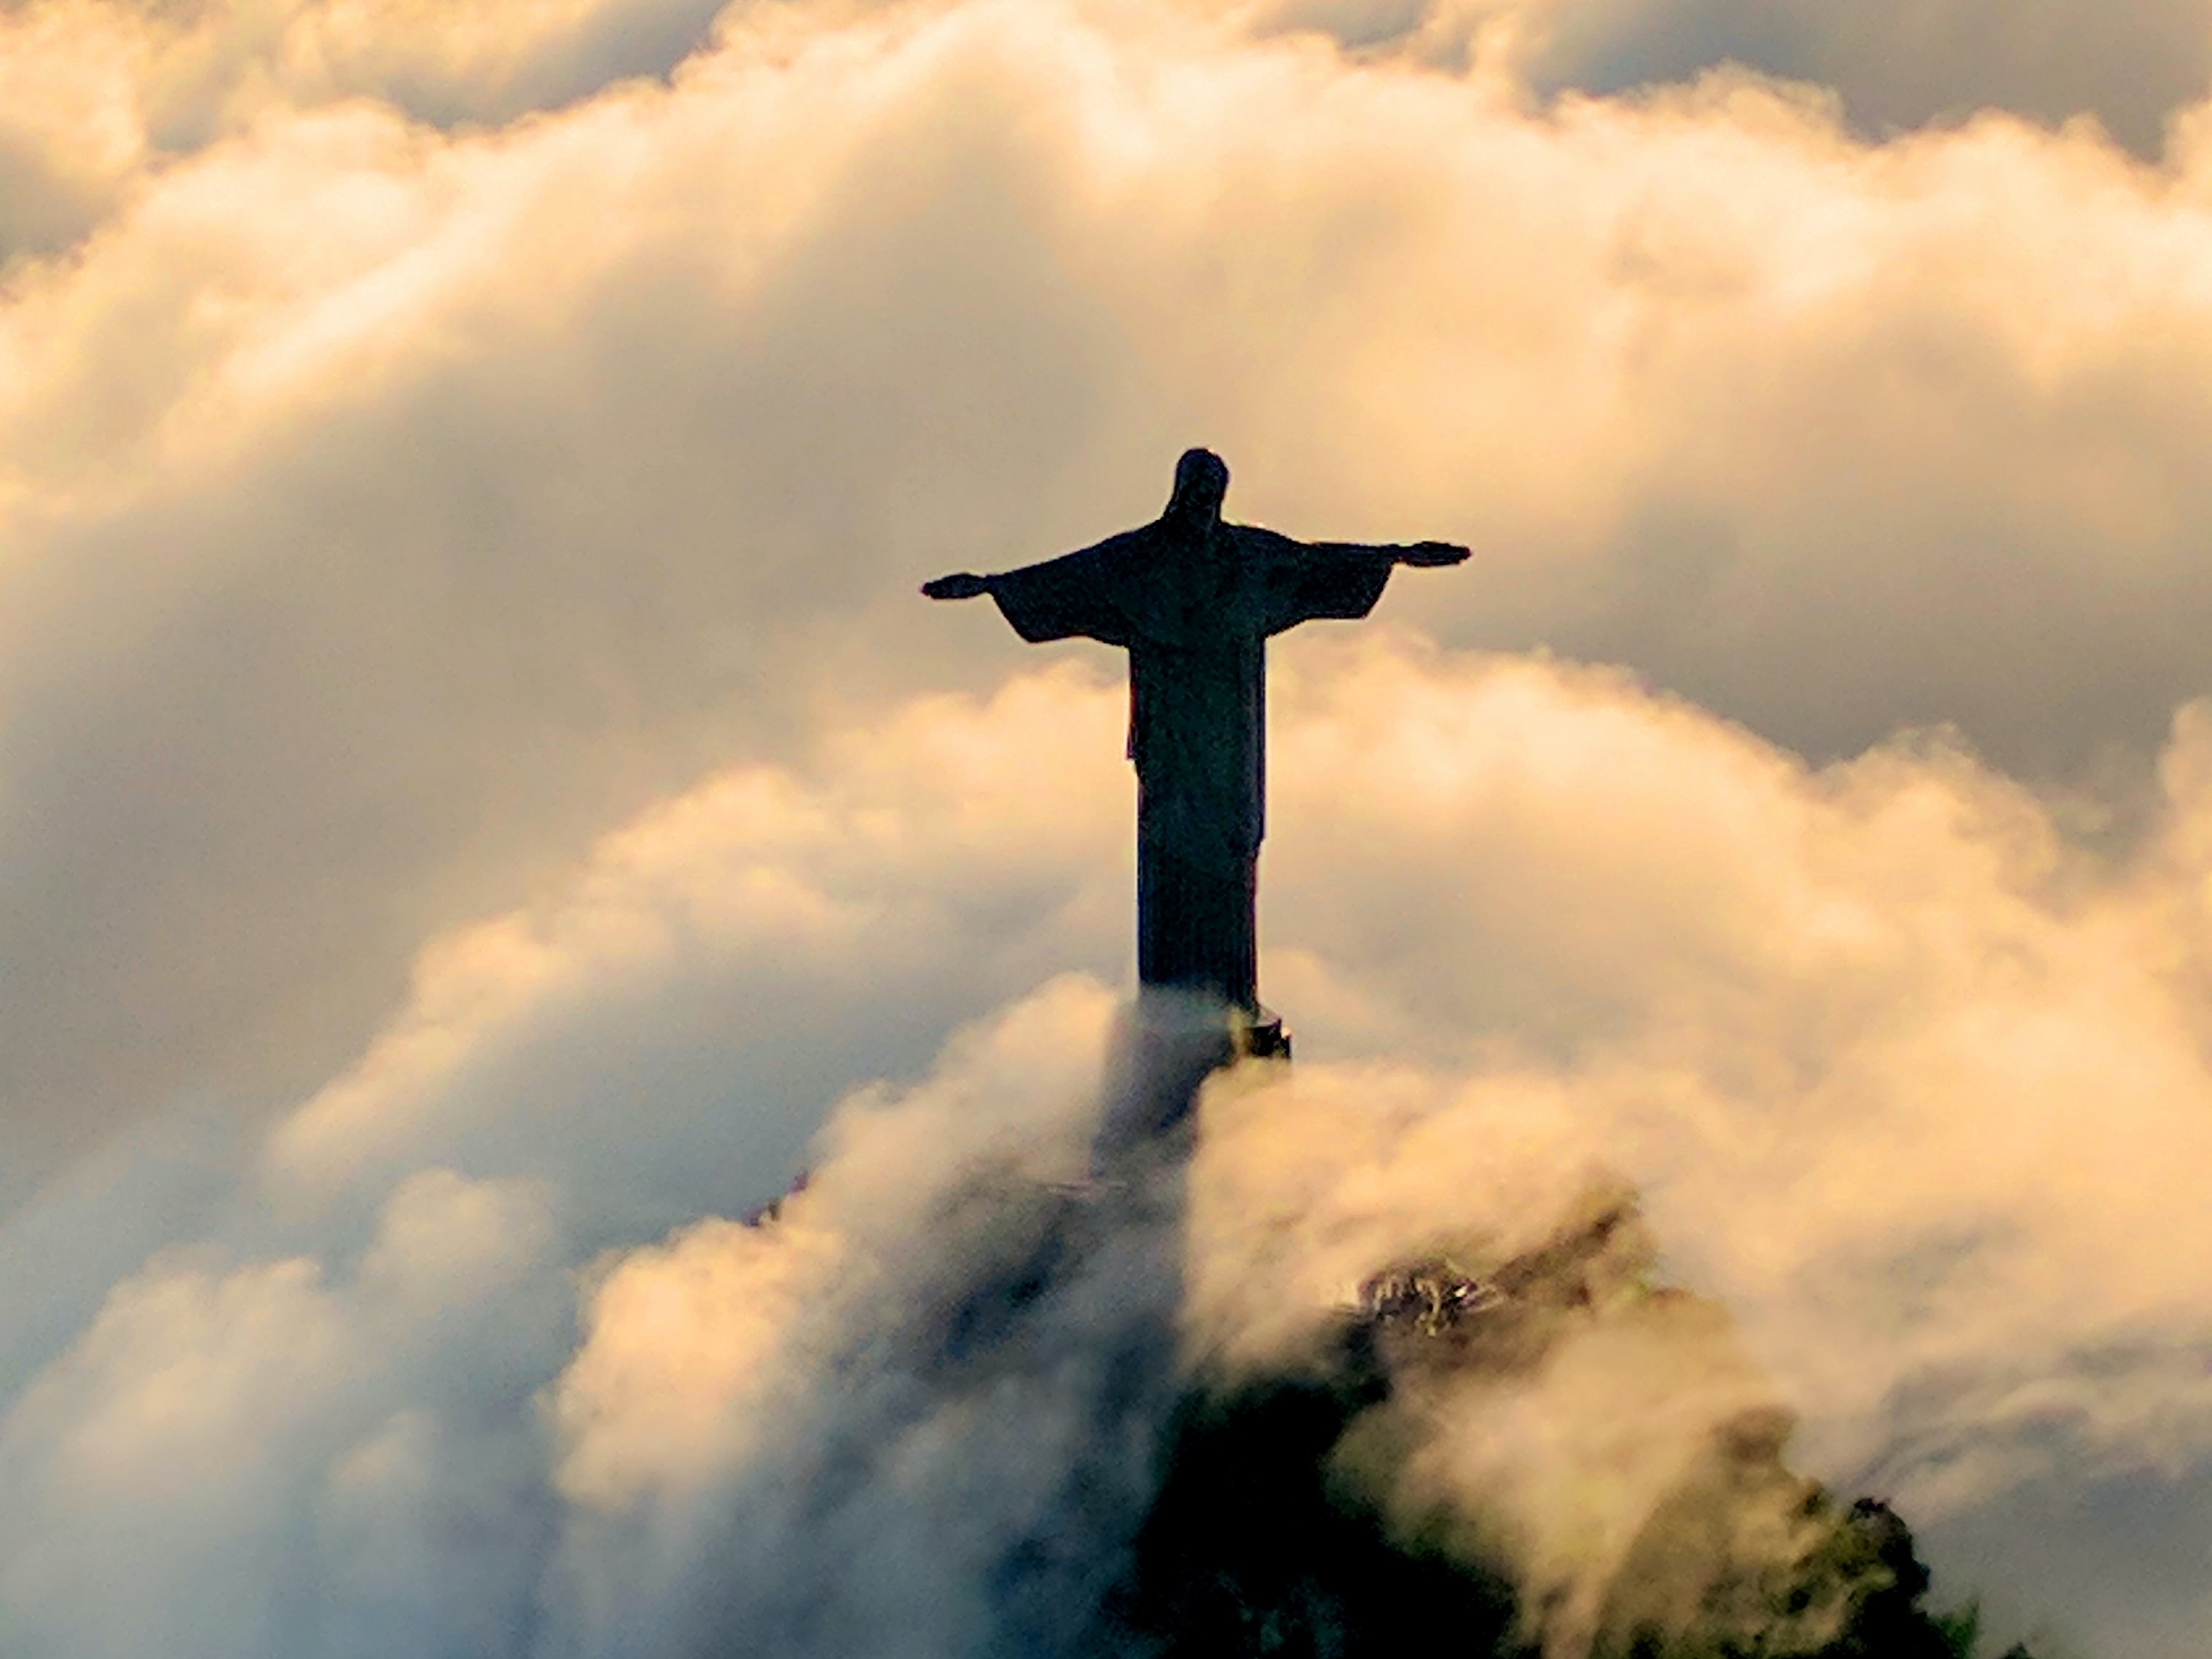 Christ the Redeemer statue on a cloudy day